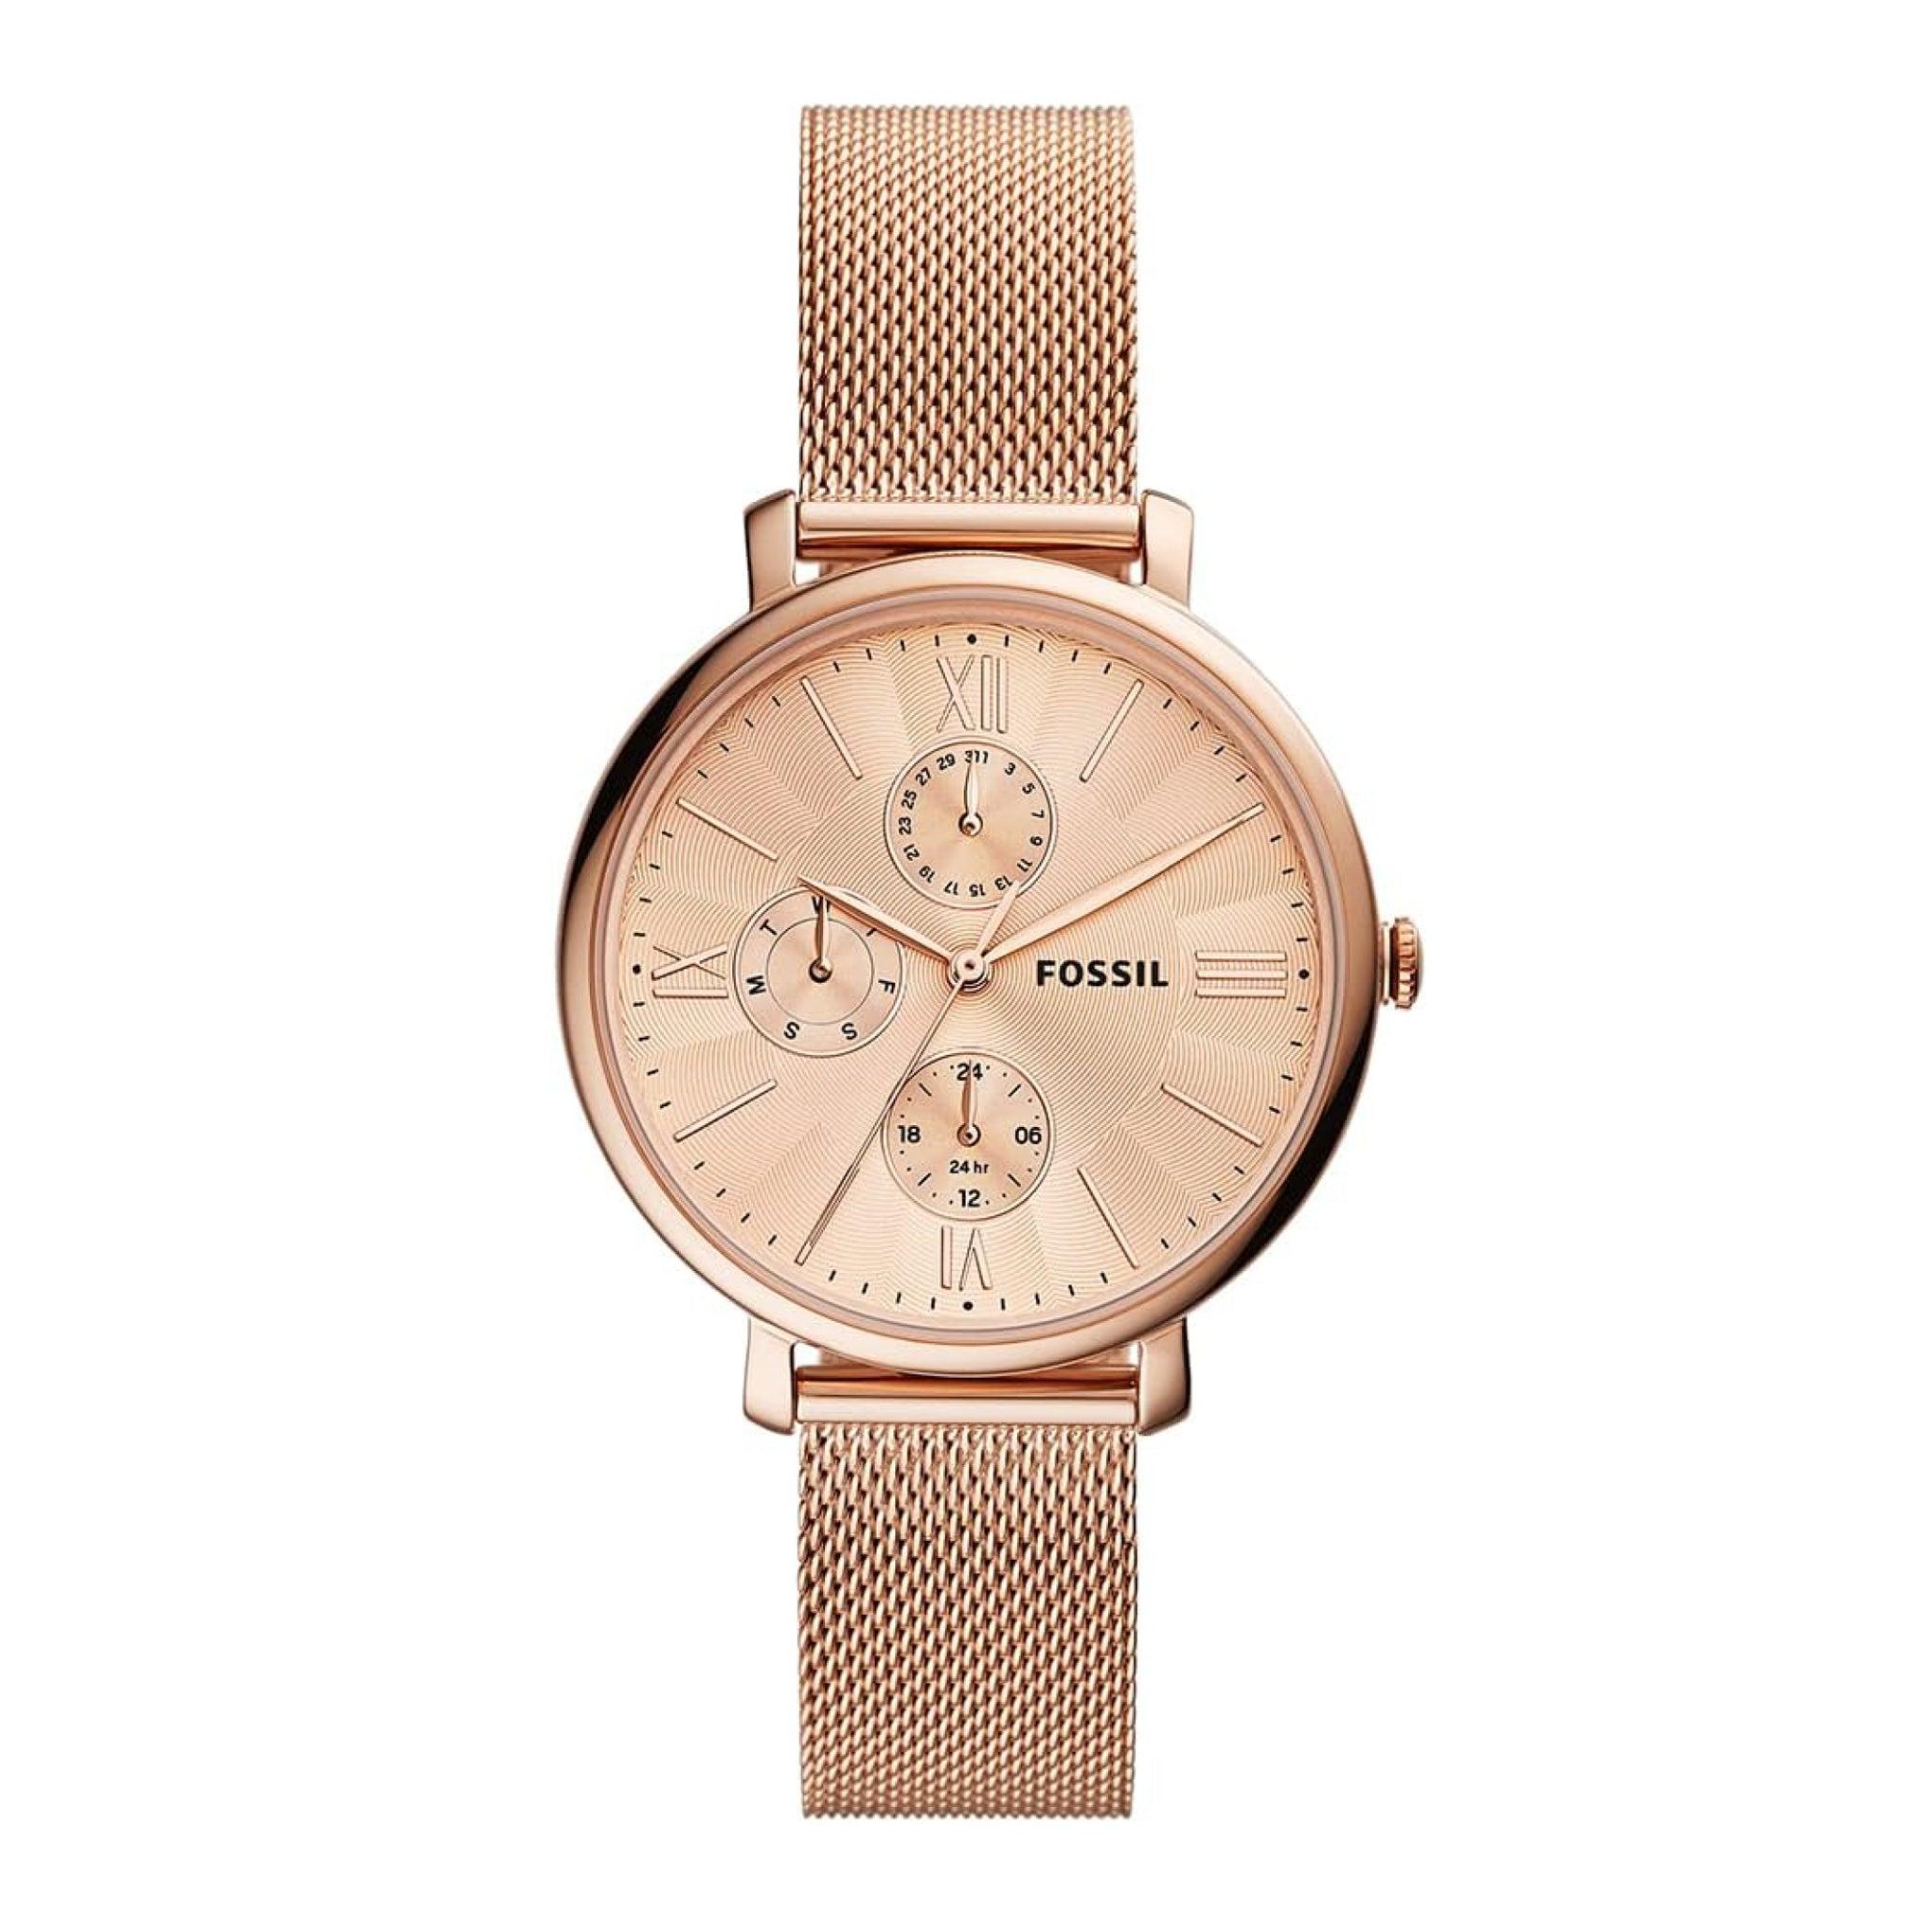 Fossil Es5098 Jacqueline Multifunction Rose Gold-Tone Stainless Steel Mesh Watch